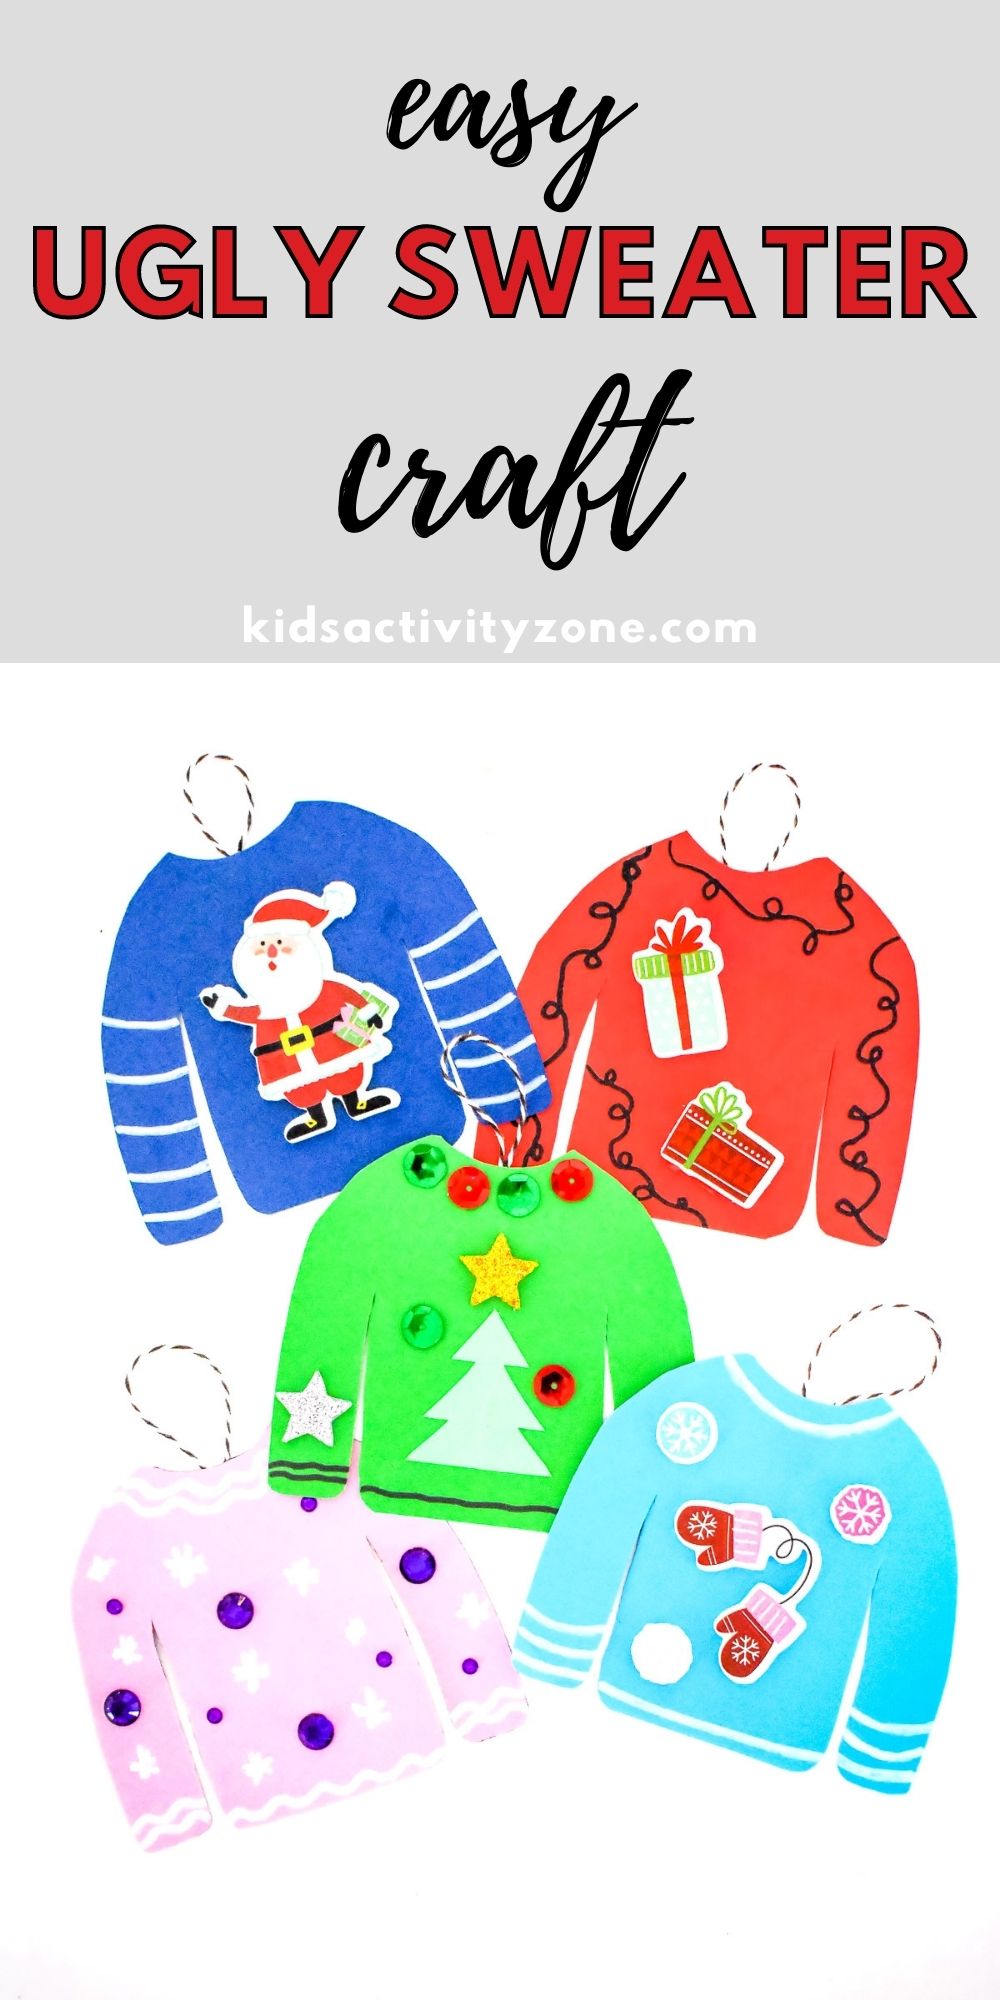 Having an Ugly Sweater Christmas party and need an activity? Make these adorable Ugly Sweater Craft! Cut out the sweaters from the template and then decorate. So fun and cute!